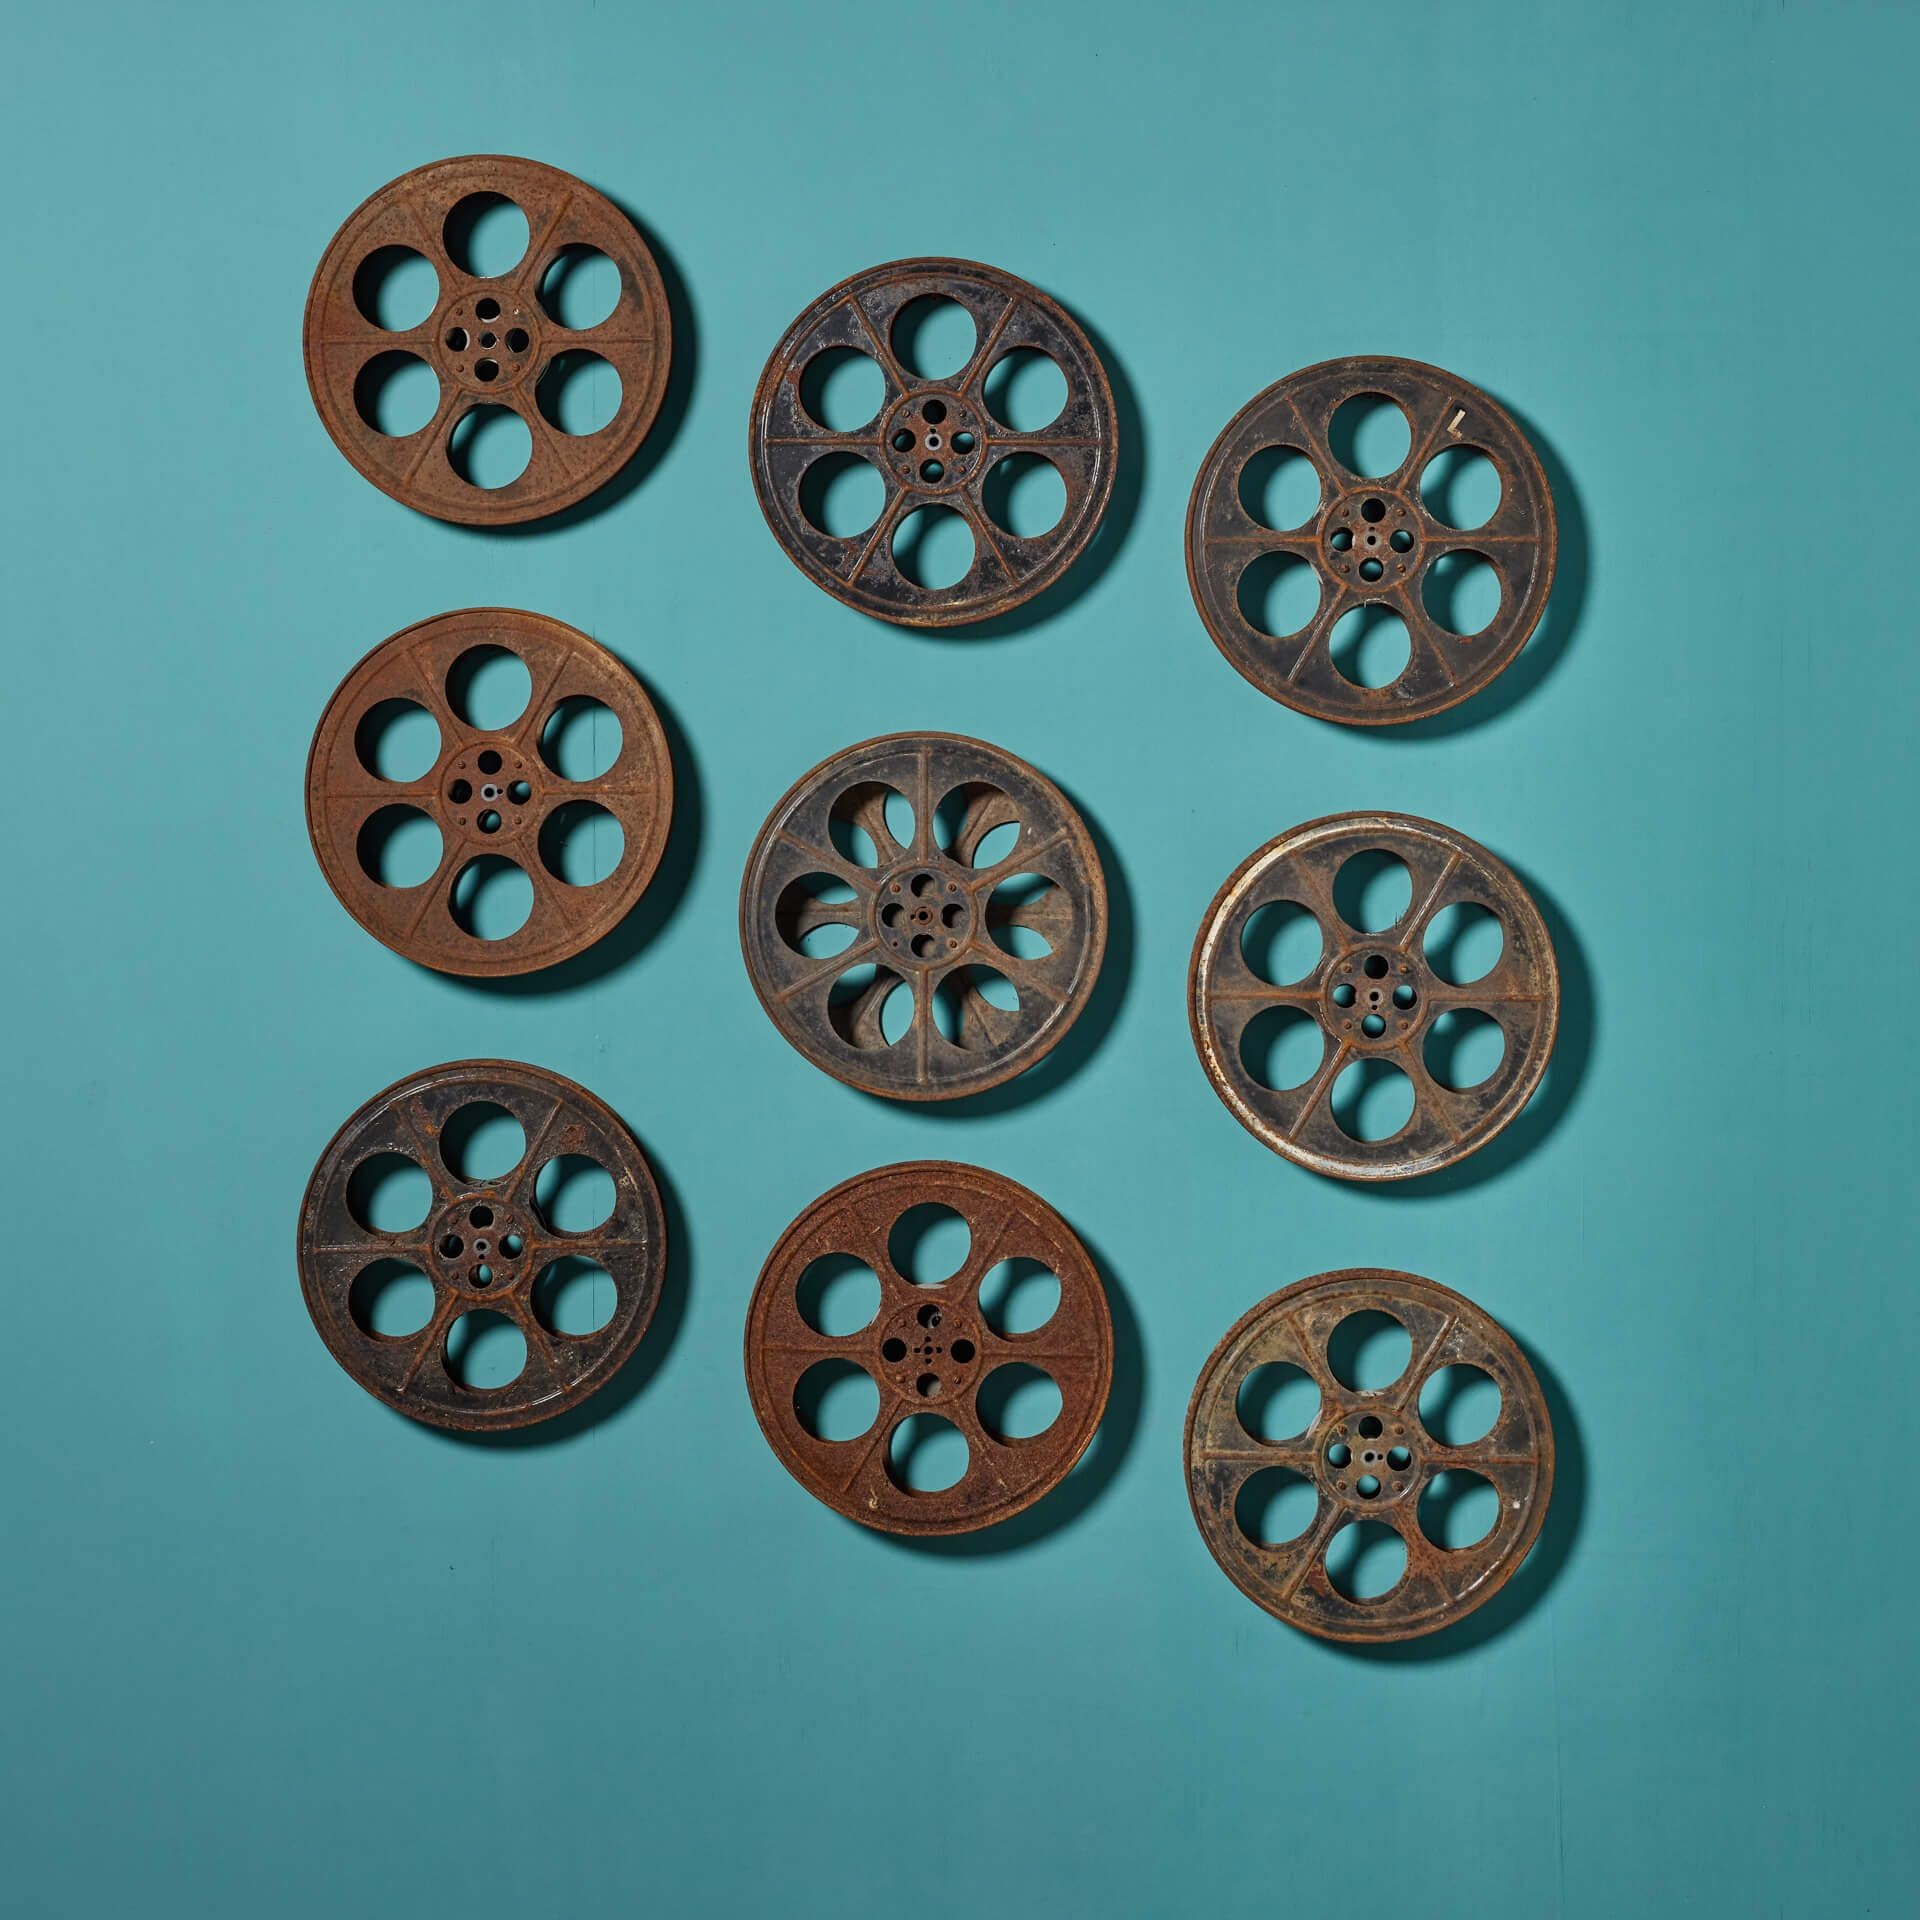 A Collection of Vintage Cinema Projection Reels or Spools - UK  Architectural Heritage